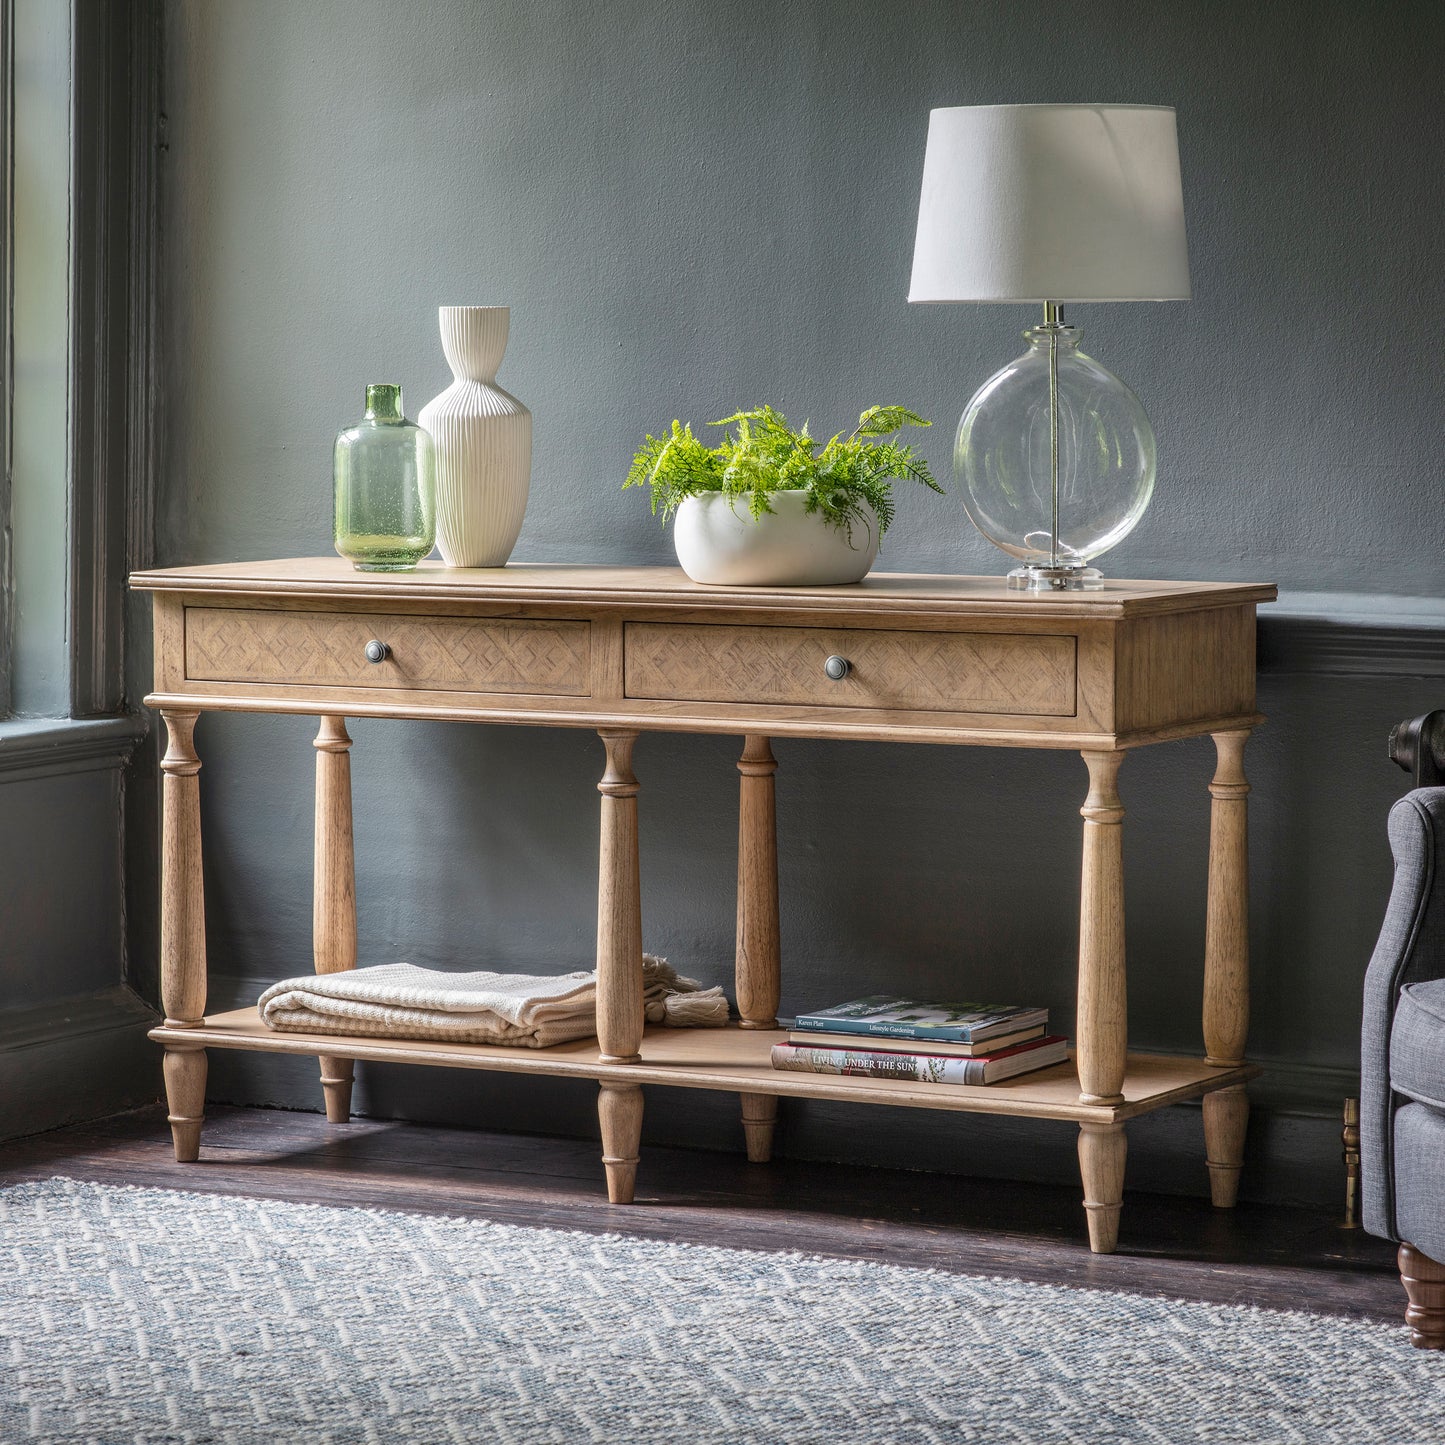 A Belsford 2 Drawer Console Table 1500x450x800mm from Kikiathome.co.uk for home furniture and interior decor.